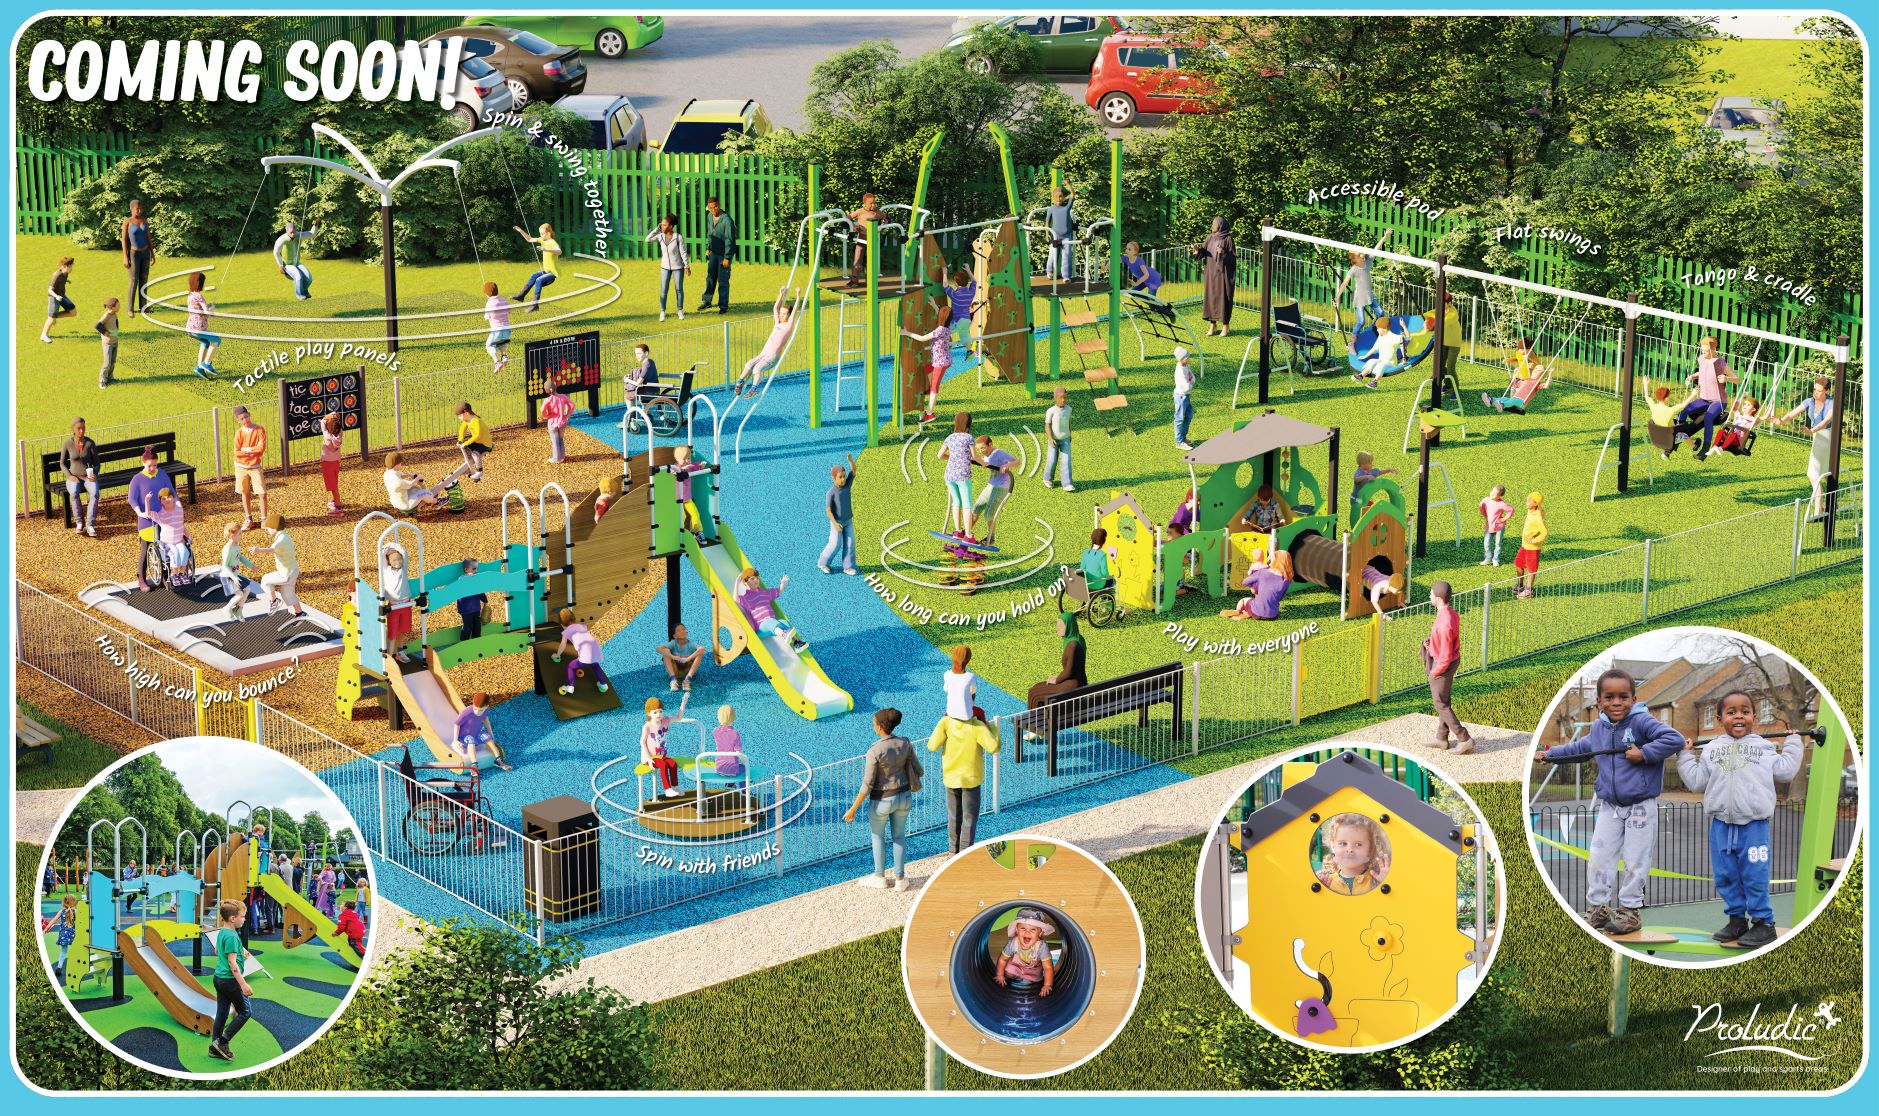 New Play Area! - Play area closure